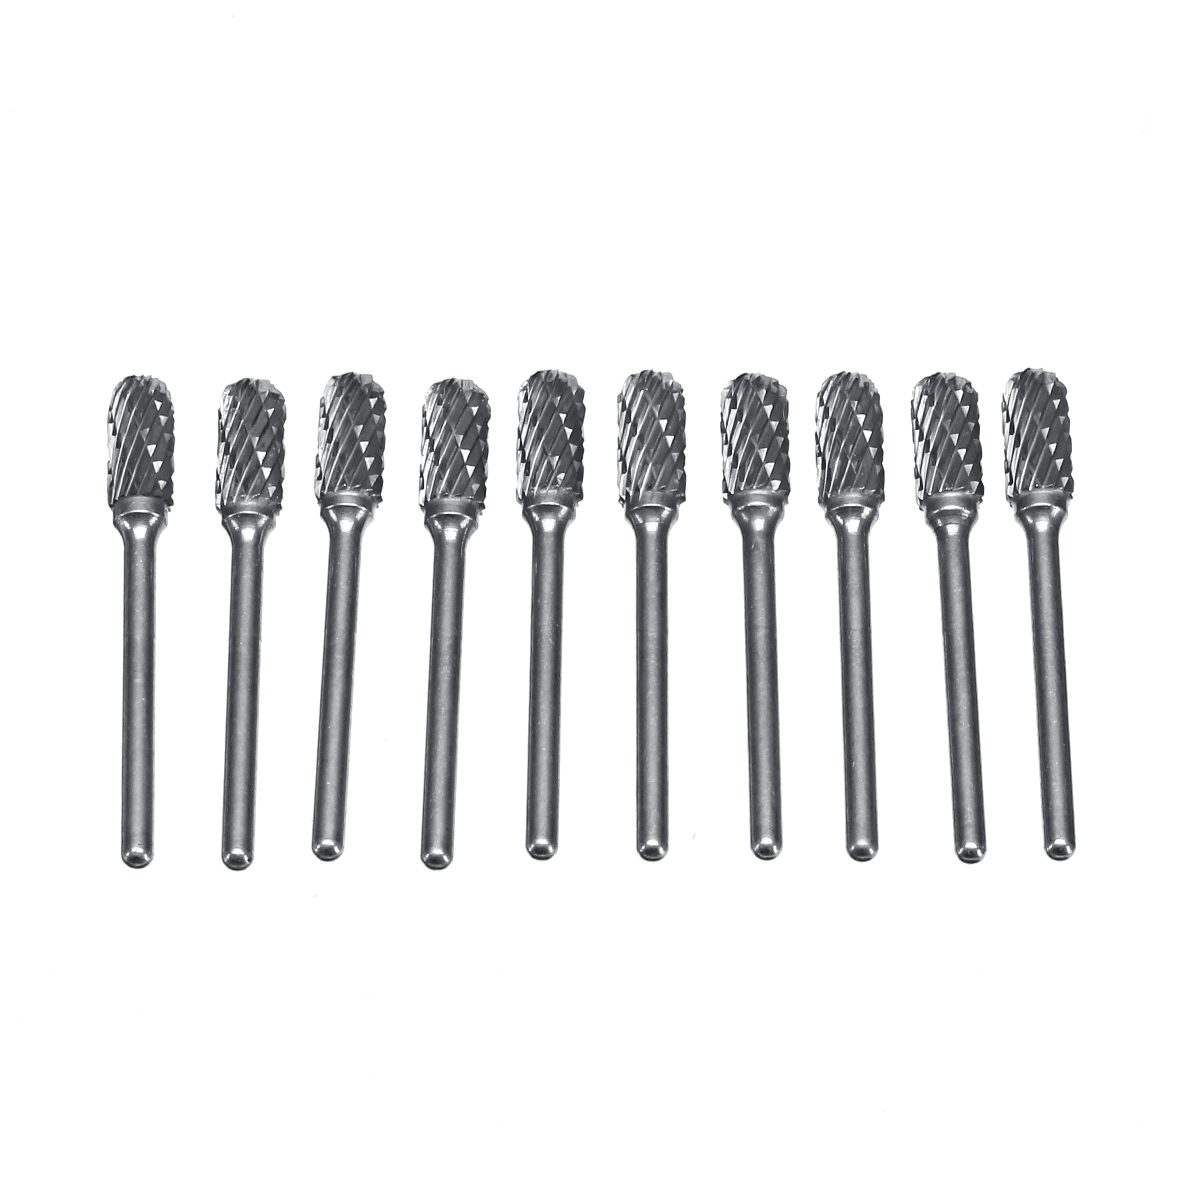 

10pcs Double-striped Tungsten Steel Solid Carbide Burrs Rotary File Tools Drill Bits Kit